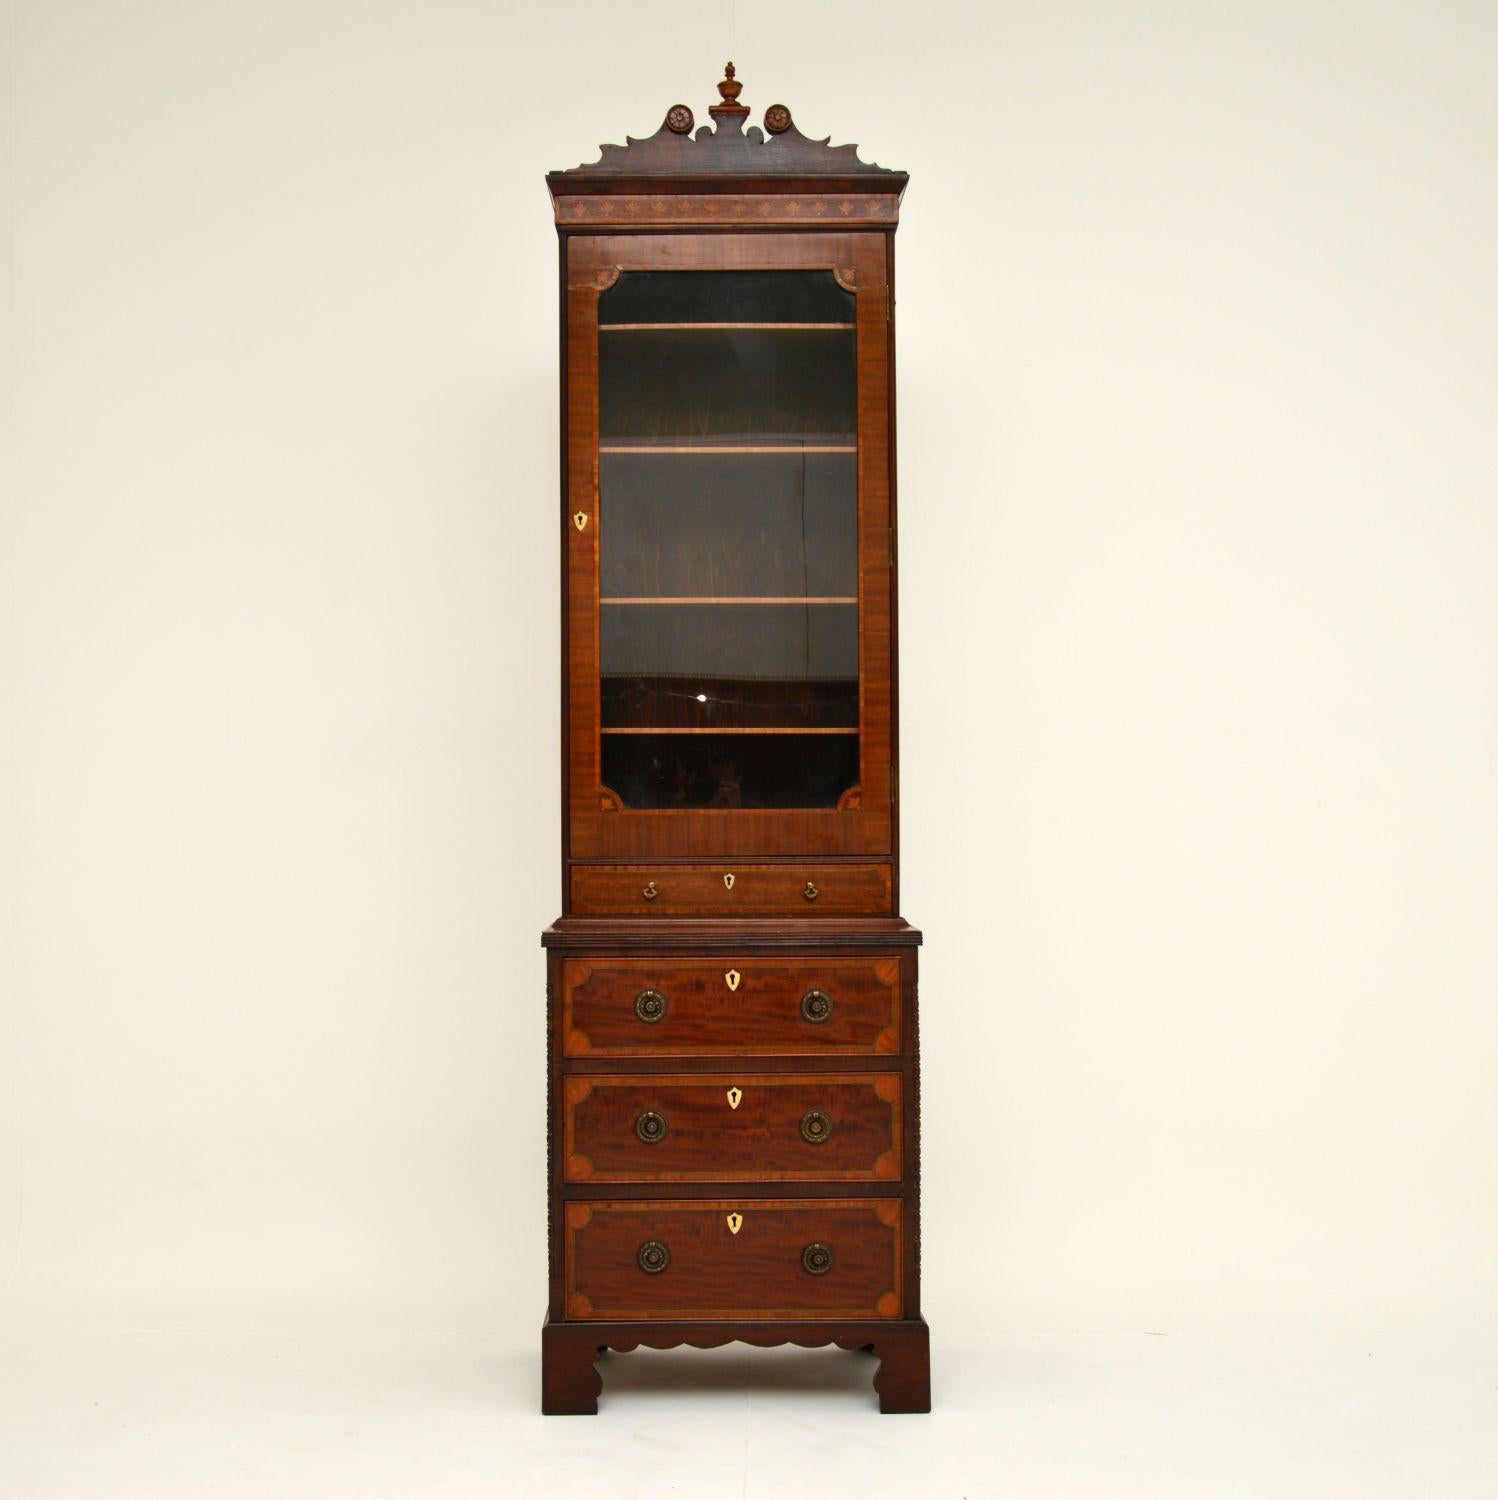 A stunning and very rare antique Georgian period bookcase, dating from around the 1790’s period. This is perhaps just about classed as a miniature bookcase due to it’s unusually small proportions, though it is still a very useful size!

It has the